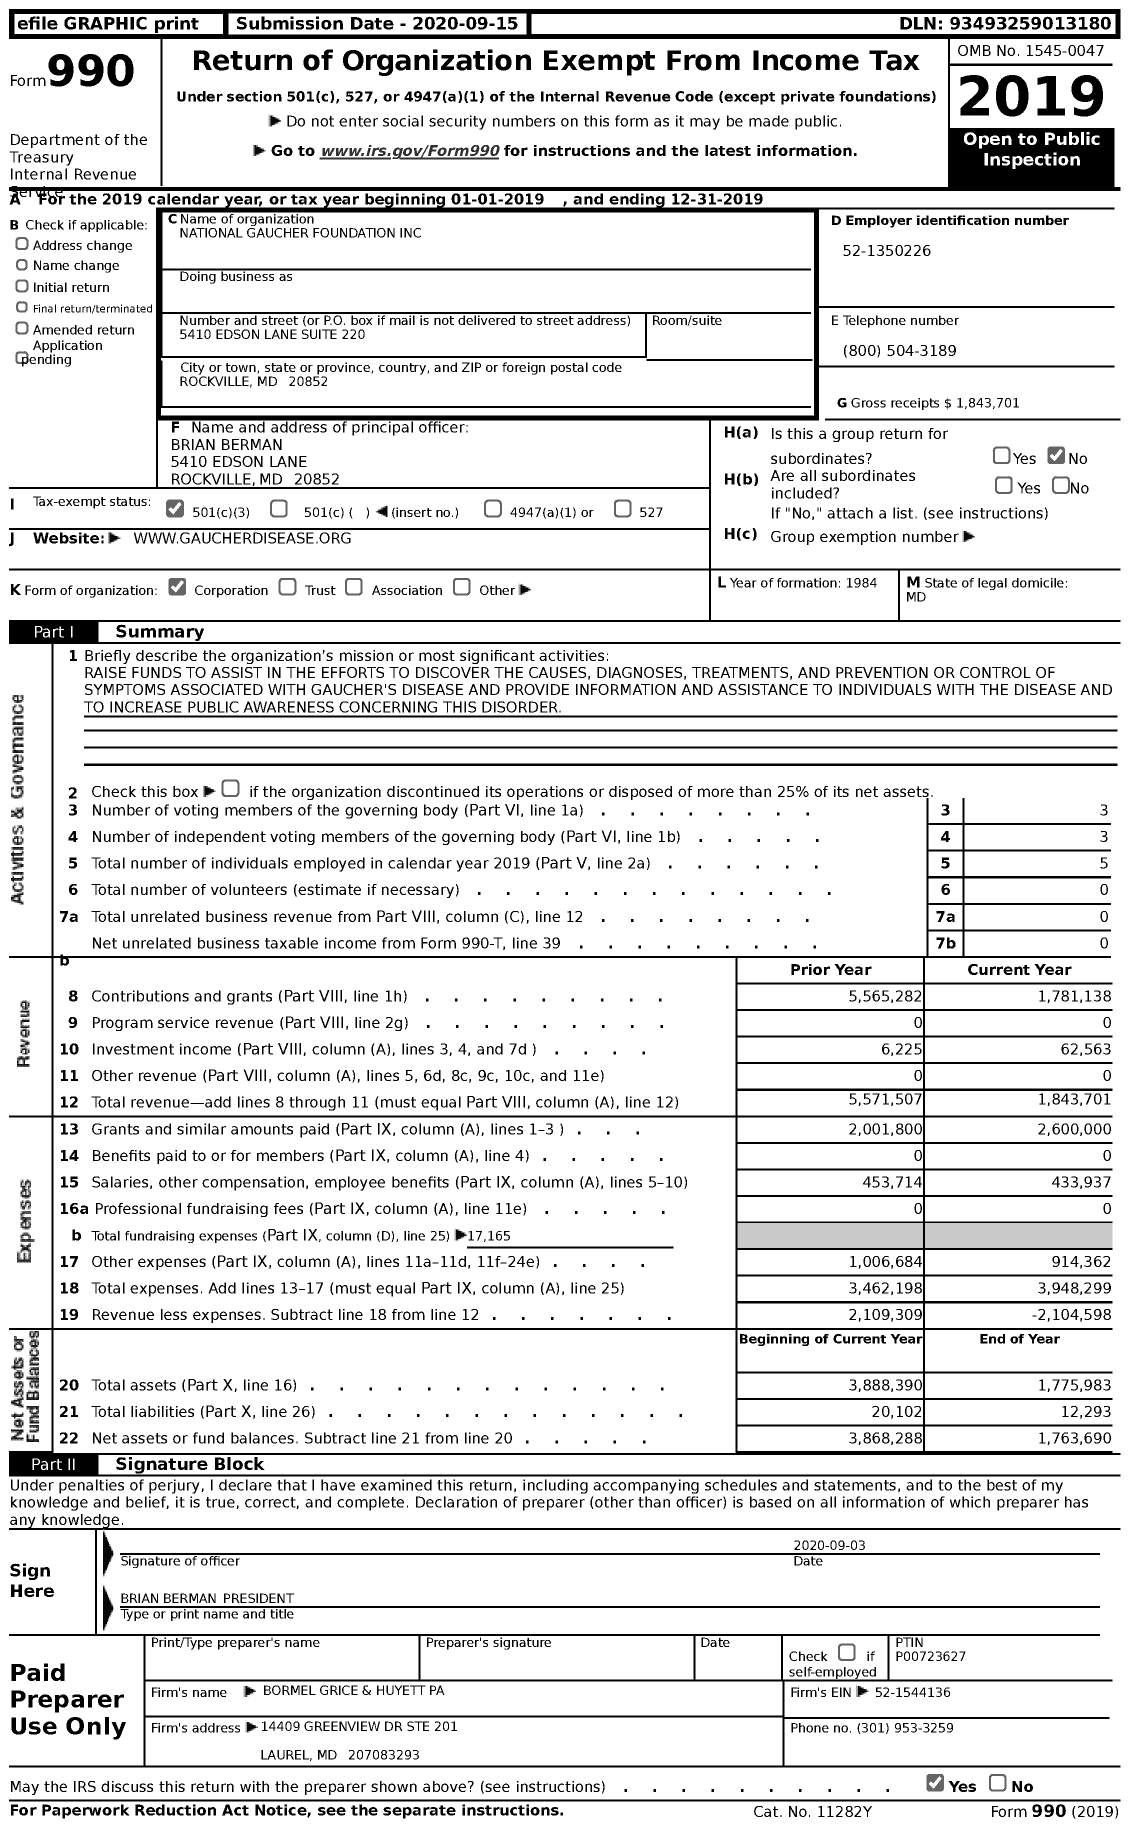 Image of first page of 2019 Form 990 for National Gaucher Foundation (NGF)